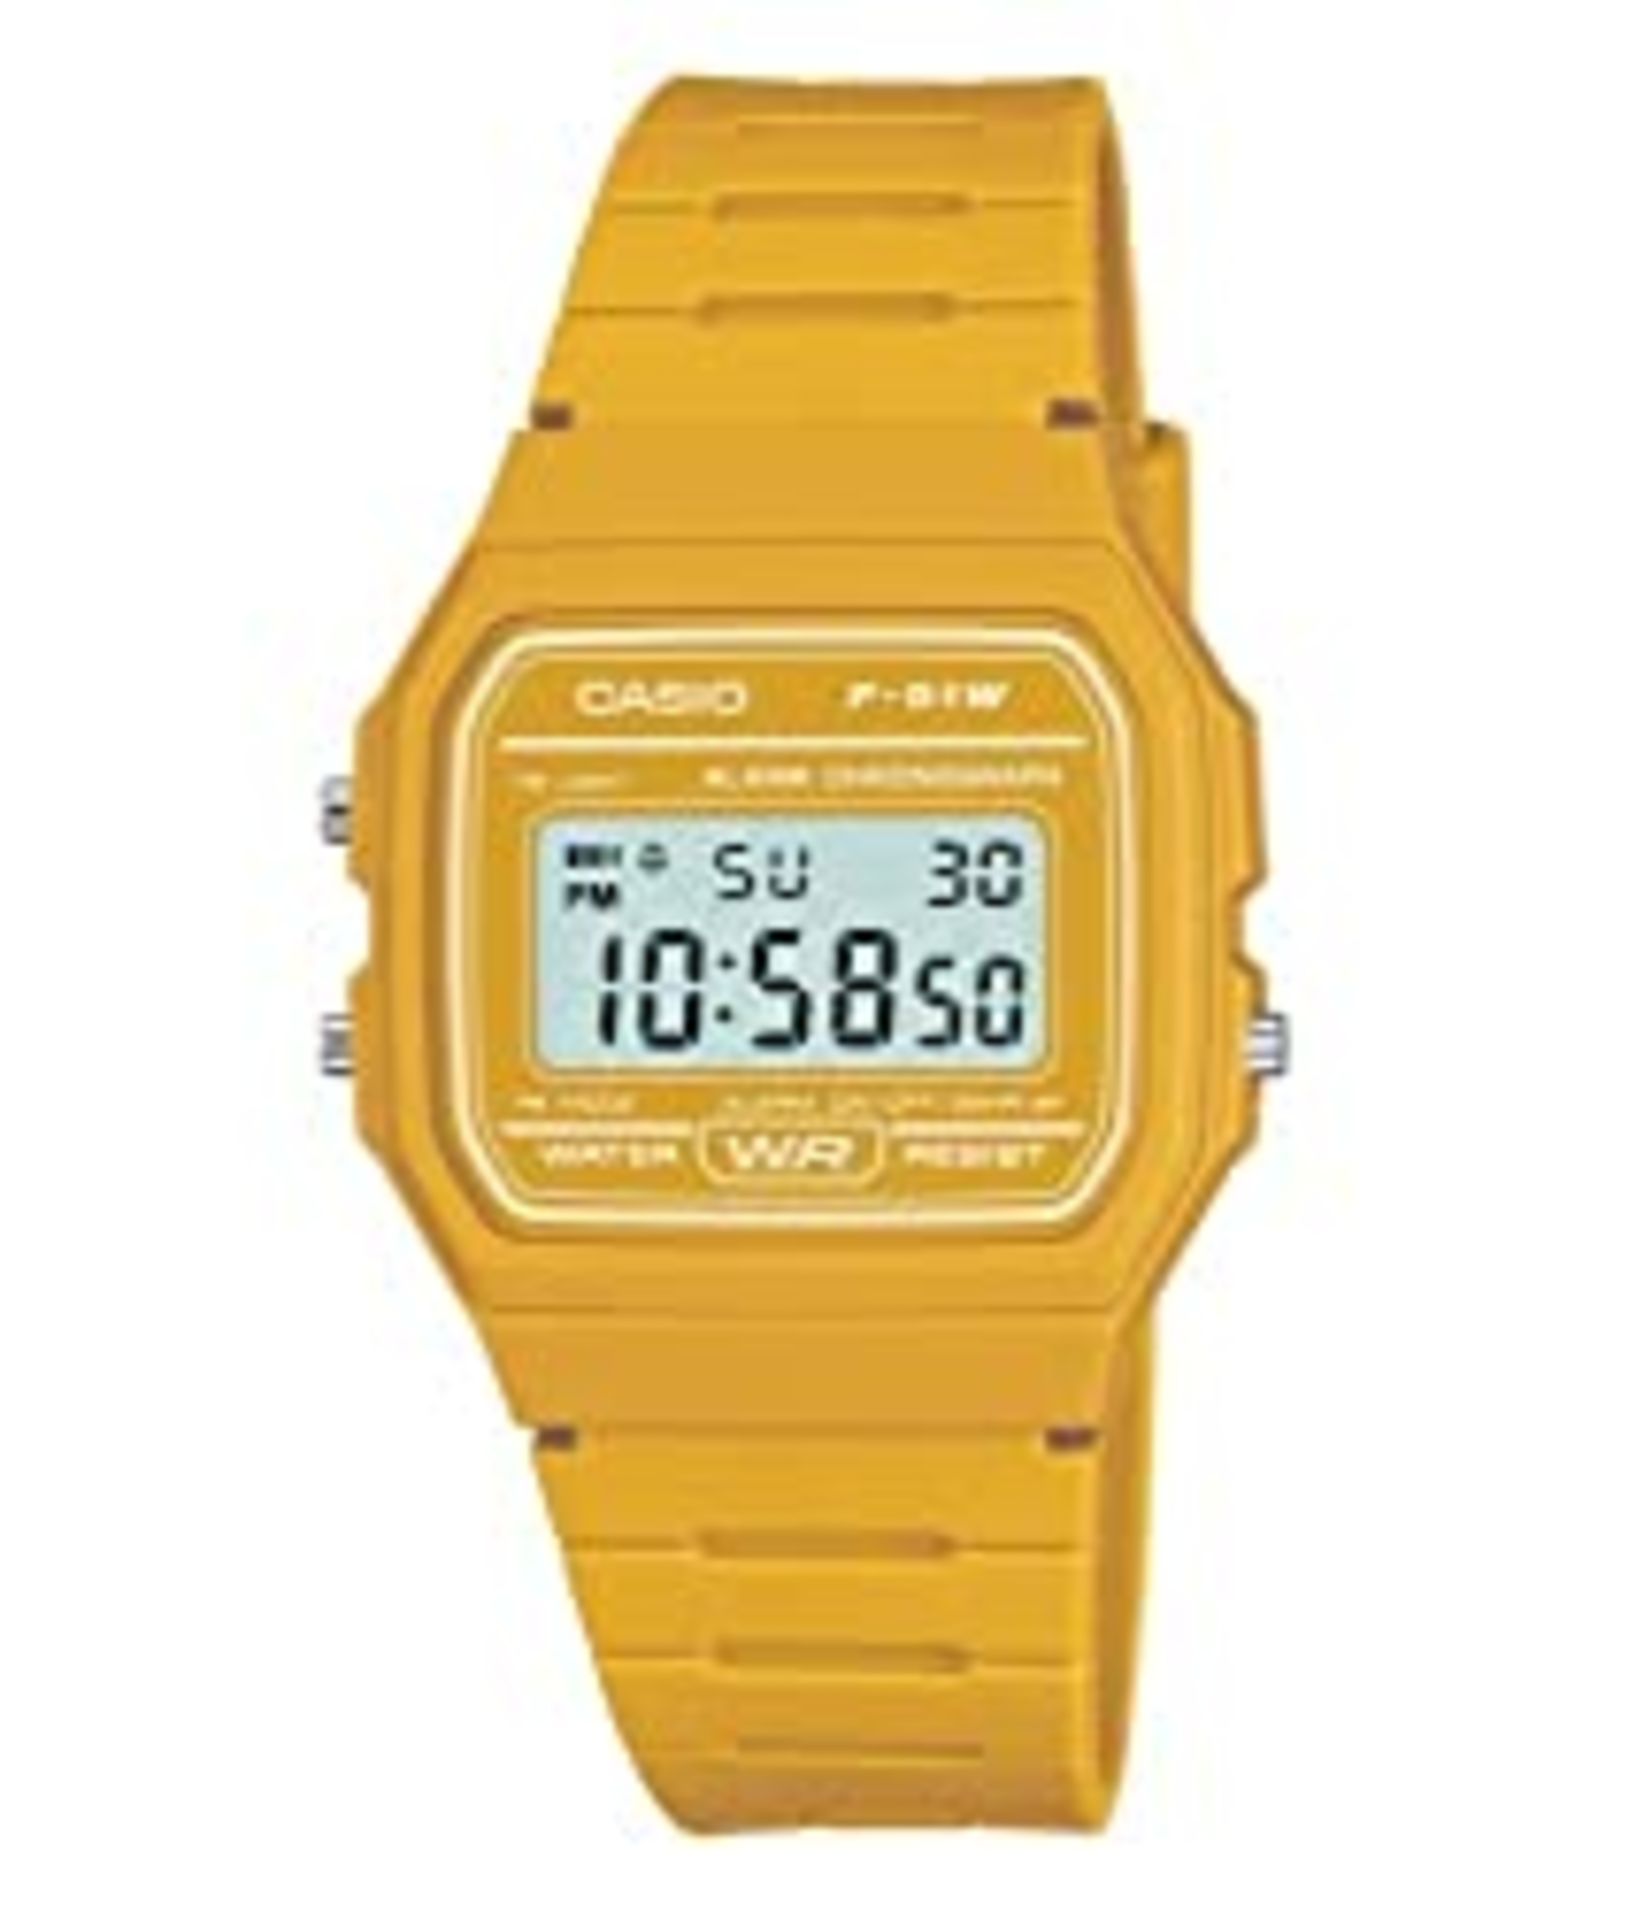 RRP £31.05 Casio Men's Yellow Digital Watch with Resin Strap F-91WC-9AEF